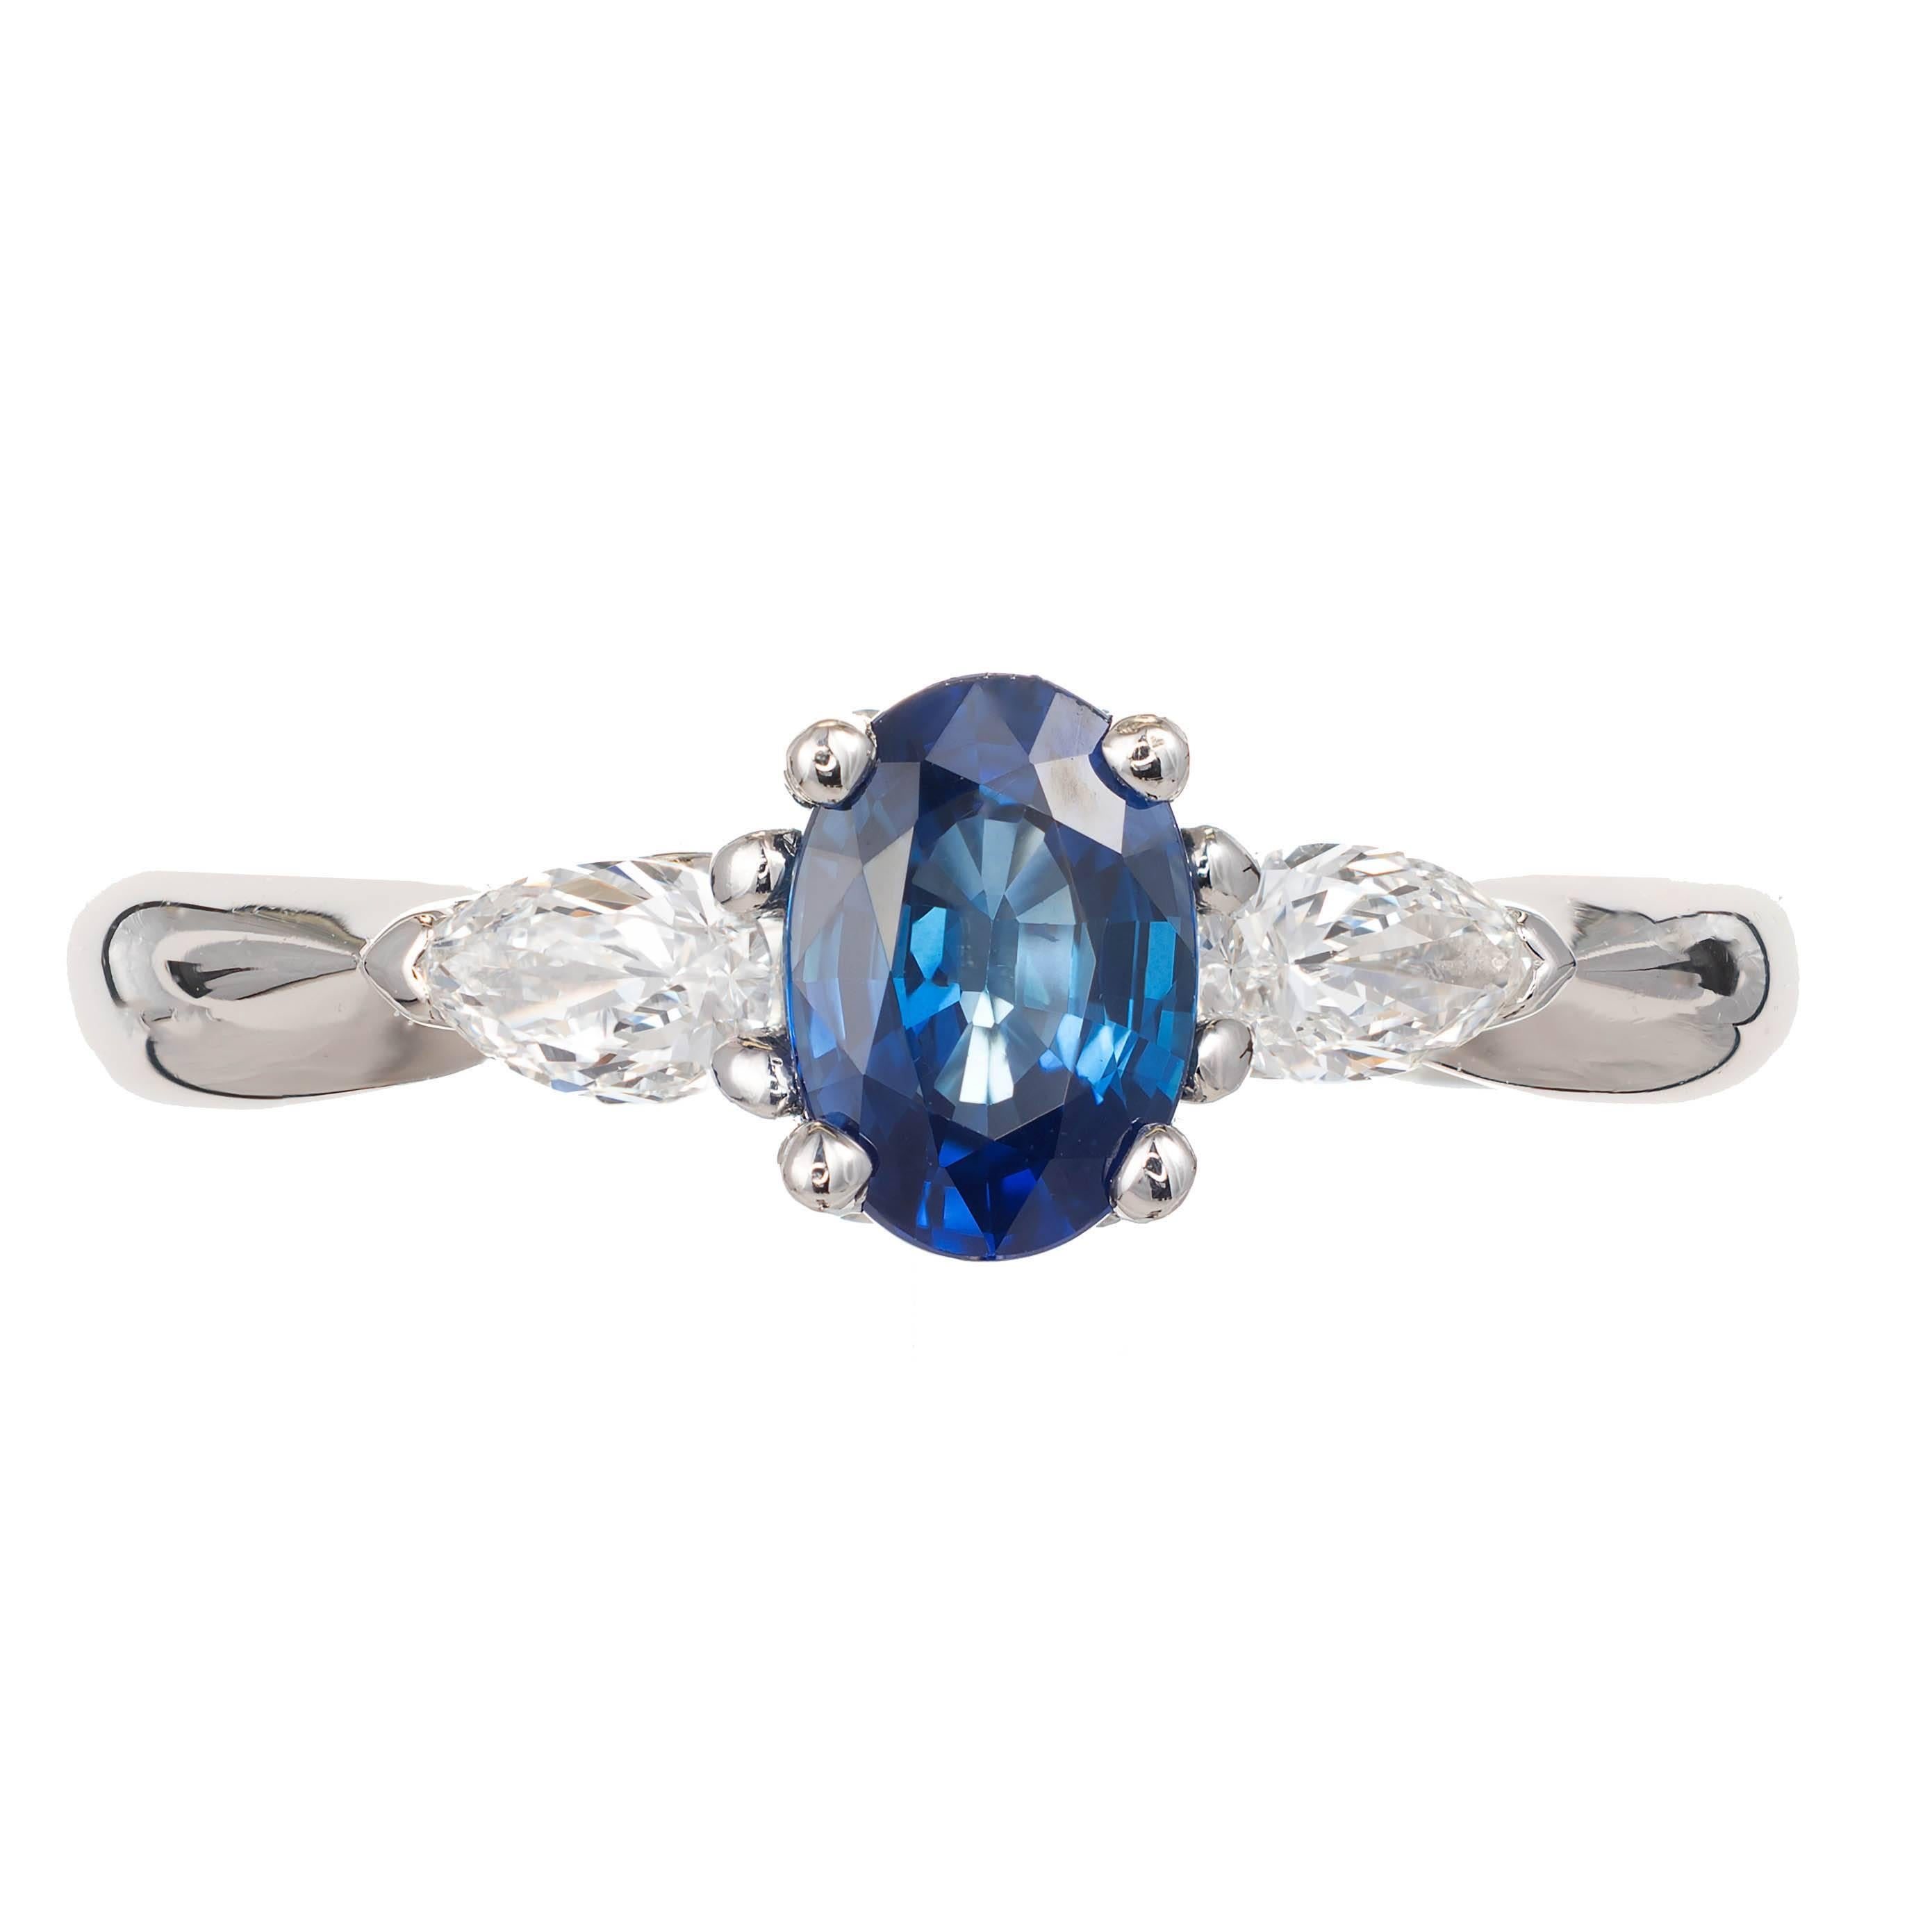 Oval sapphire and diamond pear three-stone engagement ring. Platinum setting made in the Peter Suchy workshop

1 Oval blue heated sapphire 7.10 x 5.02 x3.4 approximate 1.00 carats
2 pear cut diamonds H-I VS-SI approximate .36 carats
Size 7 and